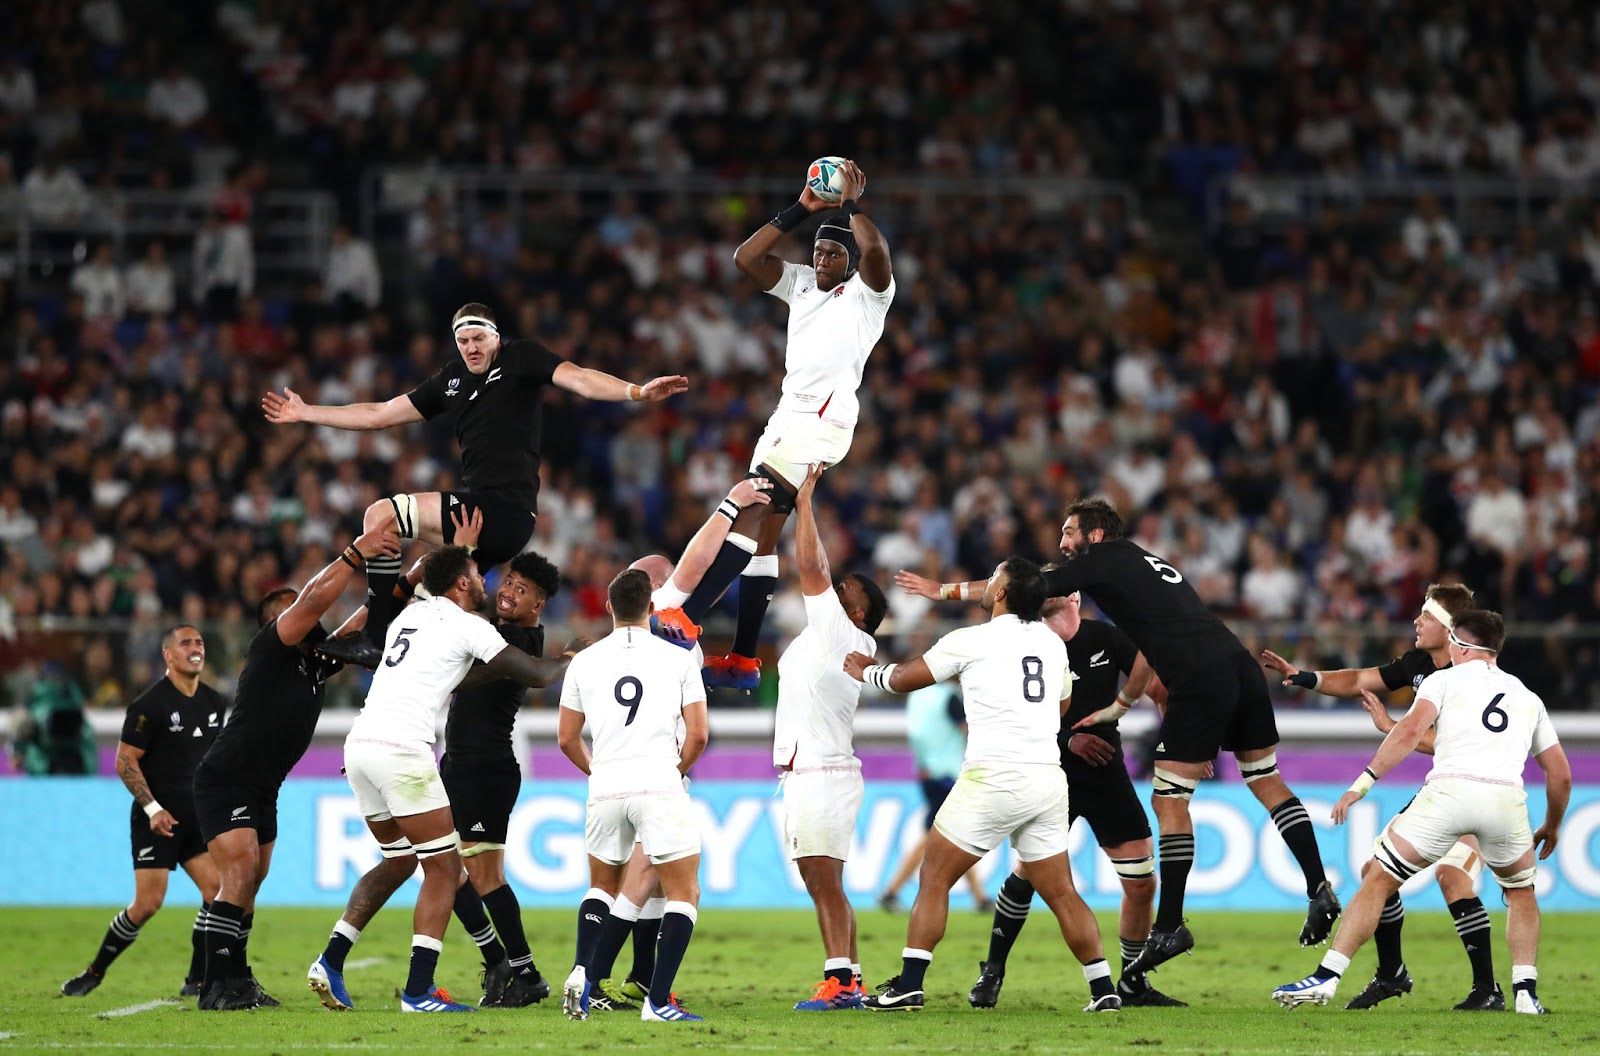 Rugby: England to play against New Zealand and South Africa in autumn